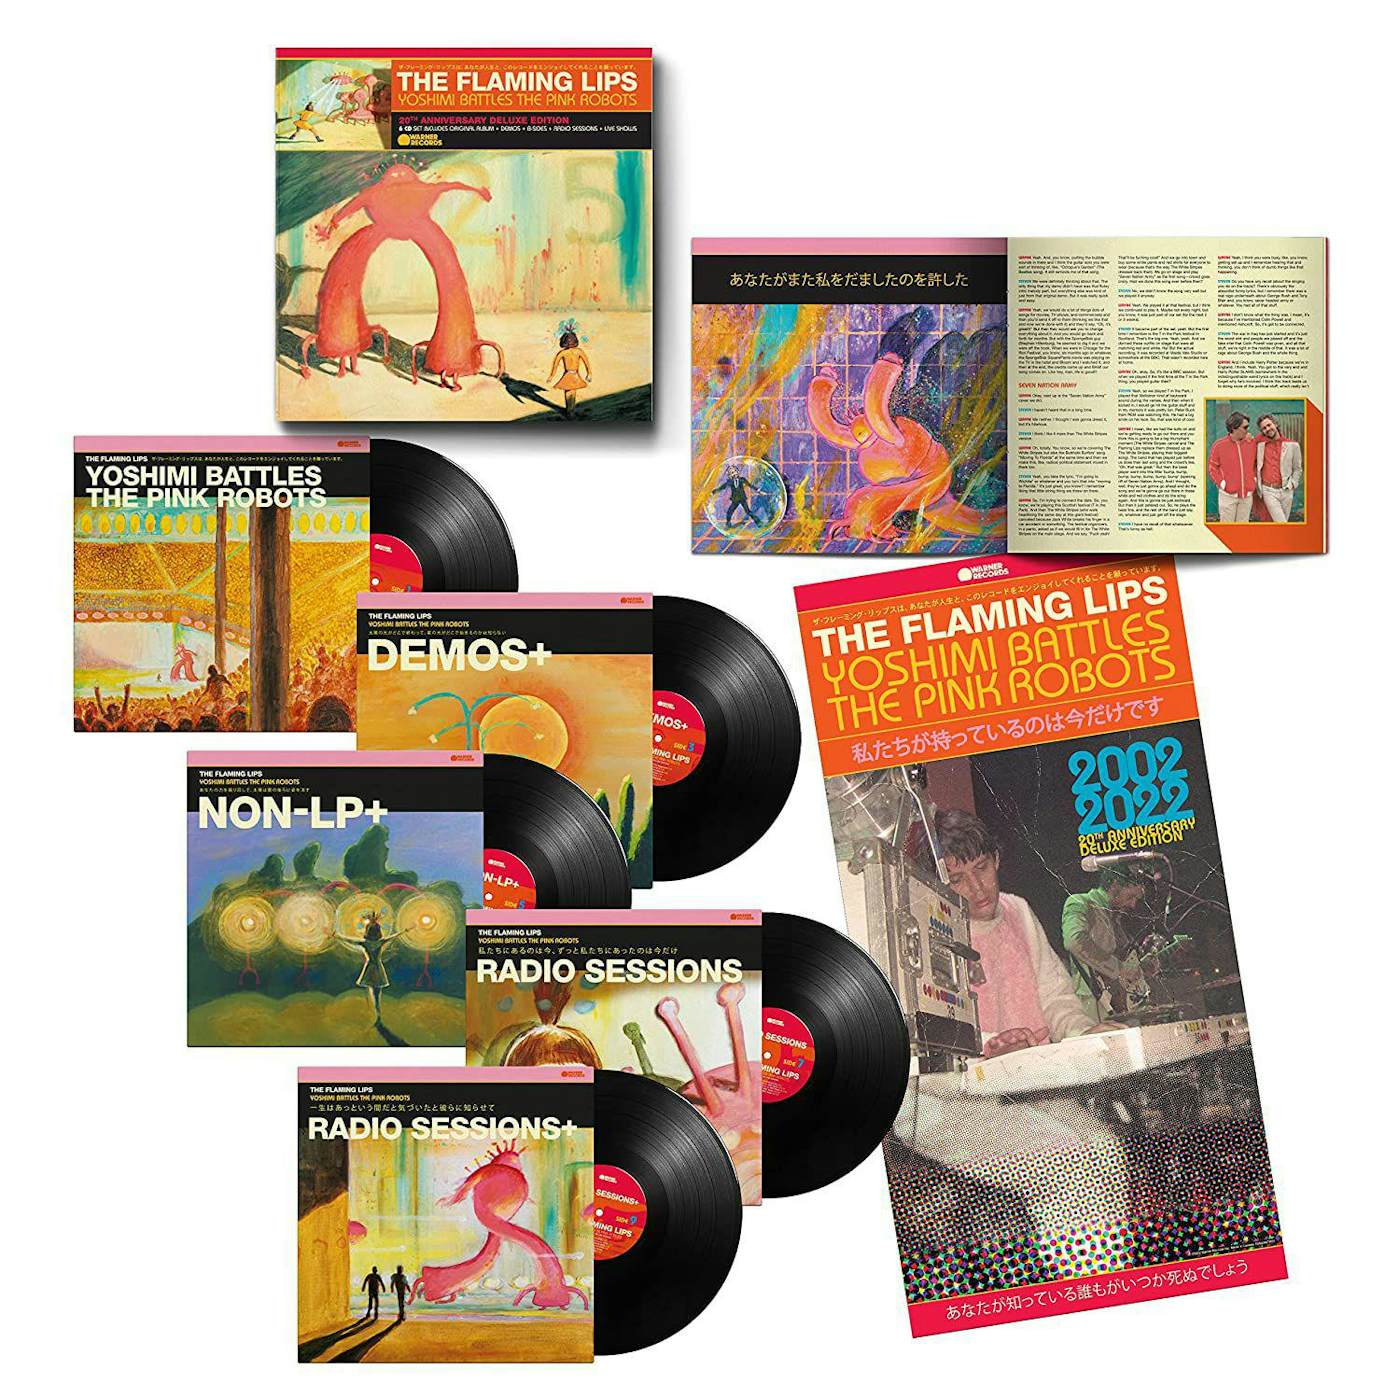 Nathaniel Ward Lav aftensmad Snart The Flaming Lips Yoshimi Battles the Pink Robots (20th Anniversary Deluxe  Edition 5LP) Box Set (Vinyl)